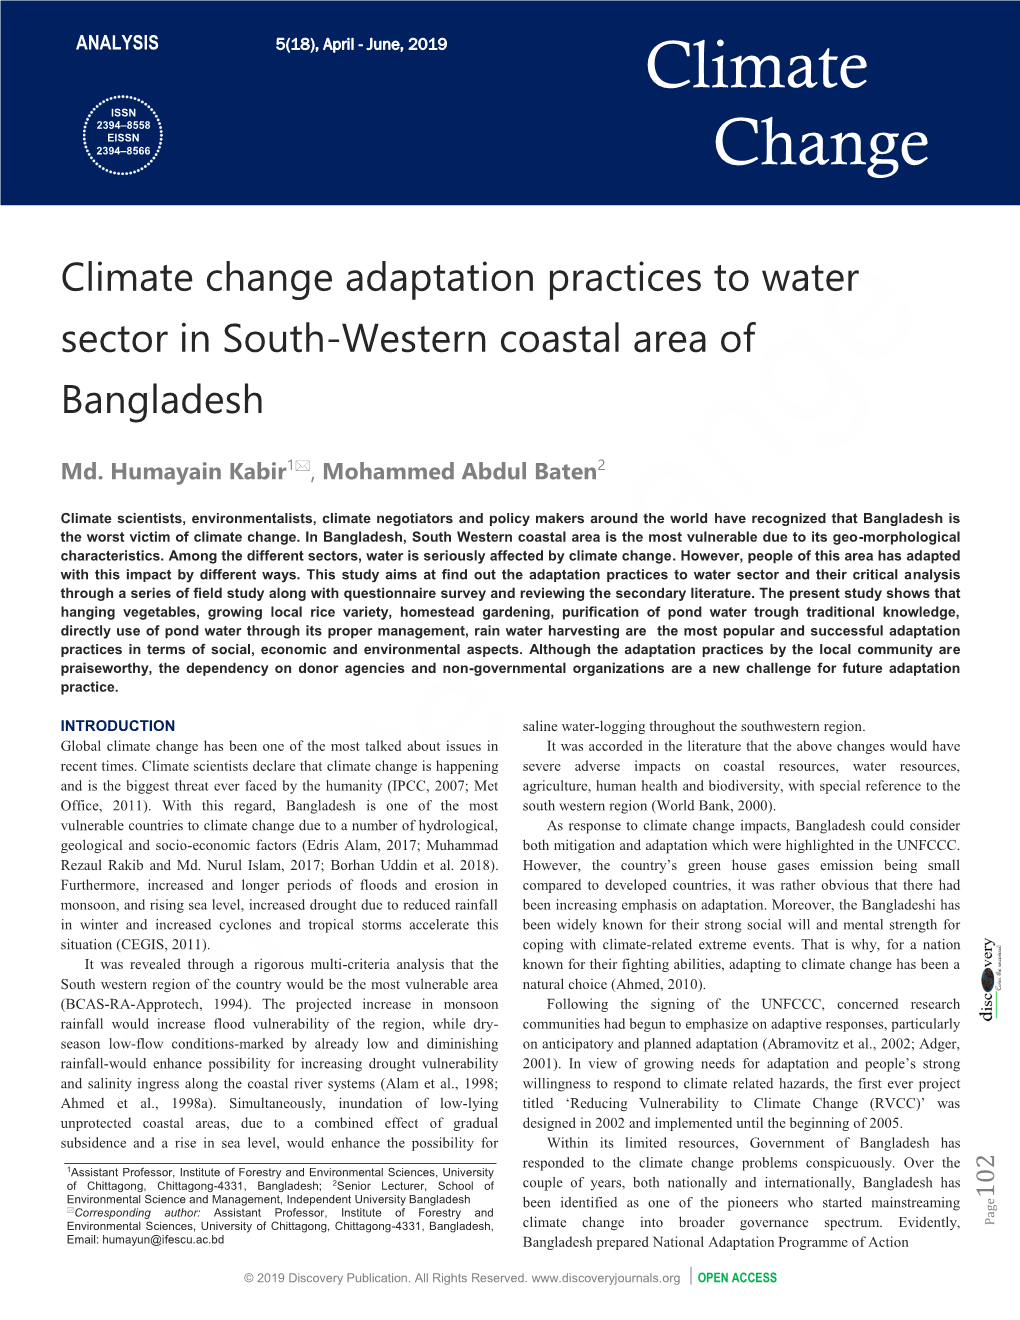 Climate Change Adaptation Practices to Water Sector in South-Western Coastal Area of Bangladesh